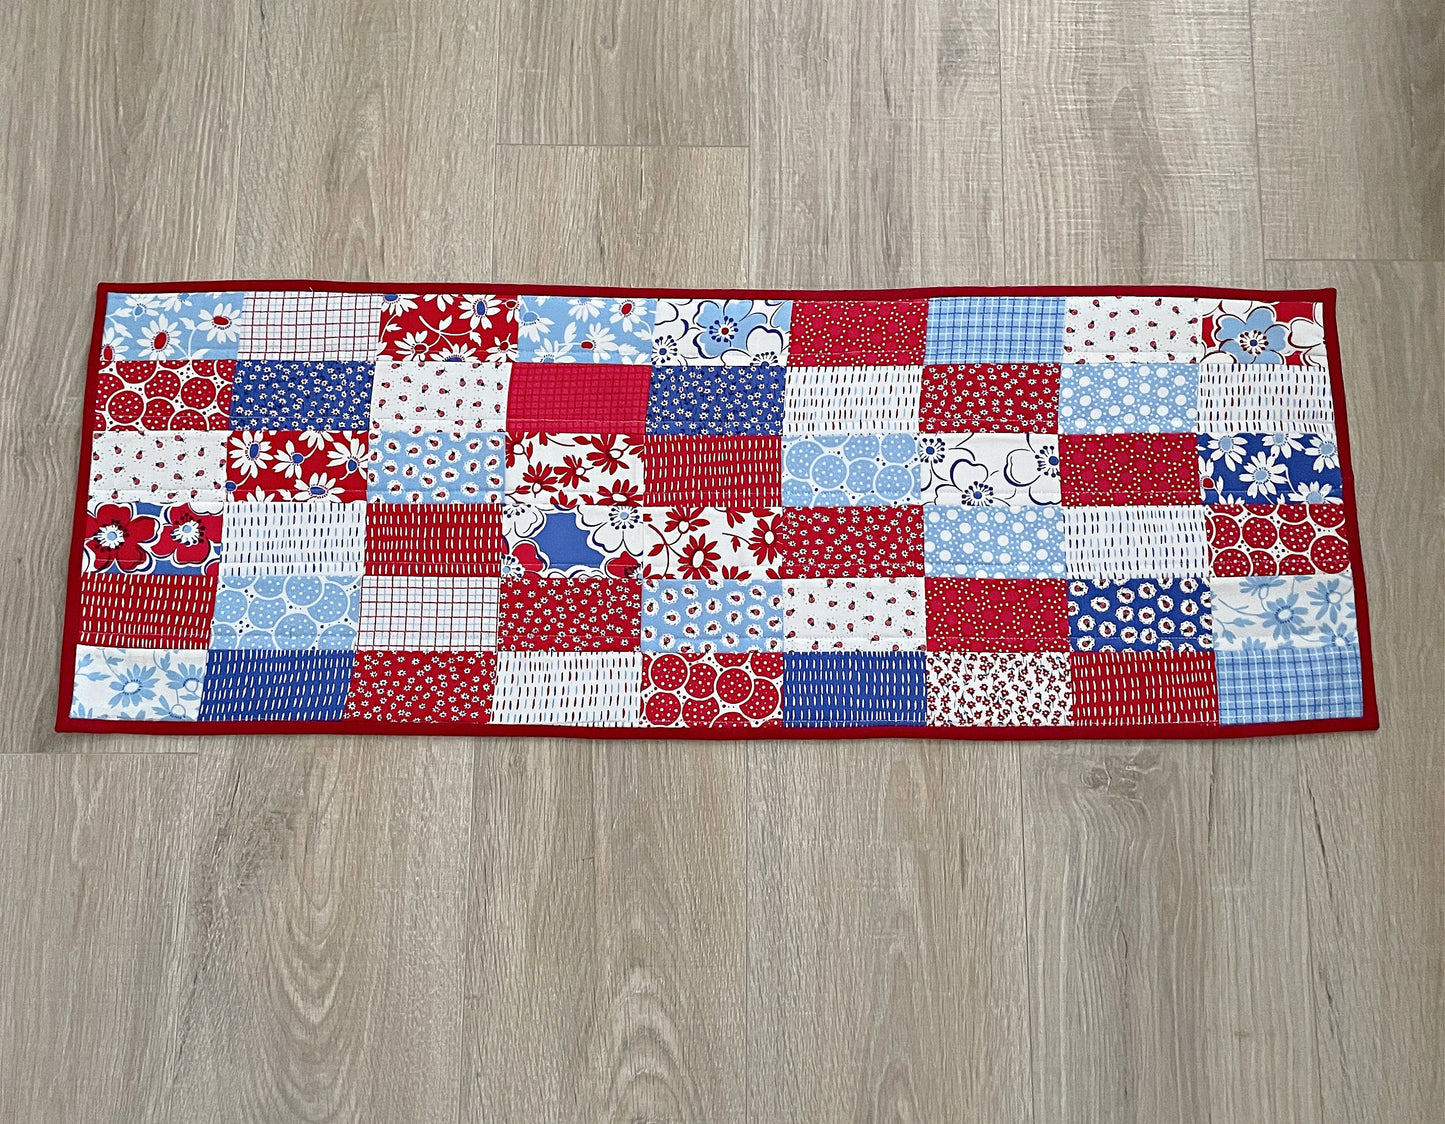 Handmade Quilted Table Runner, Red White and Blue Retro Floral Runner,